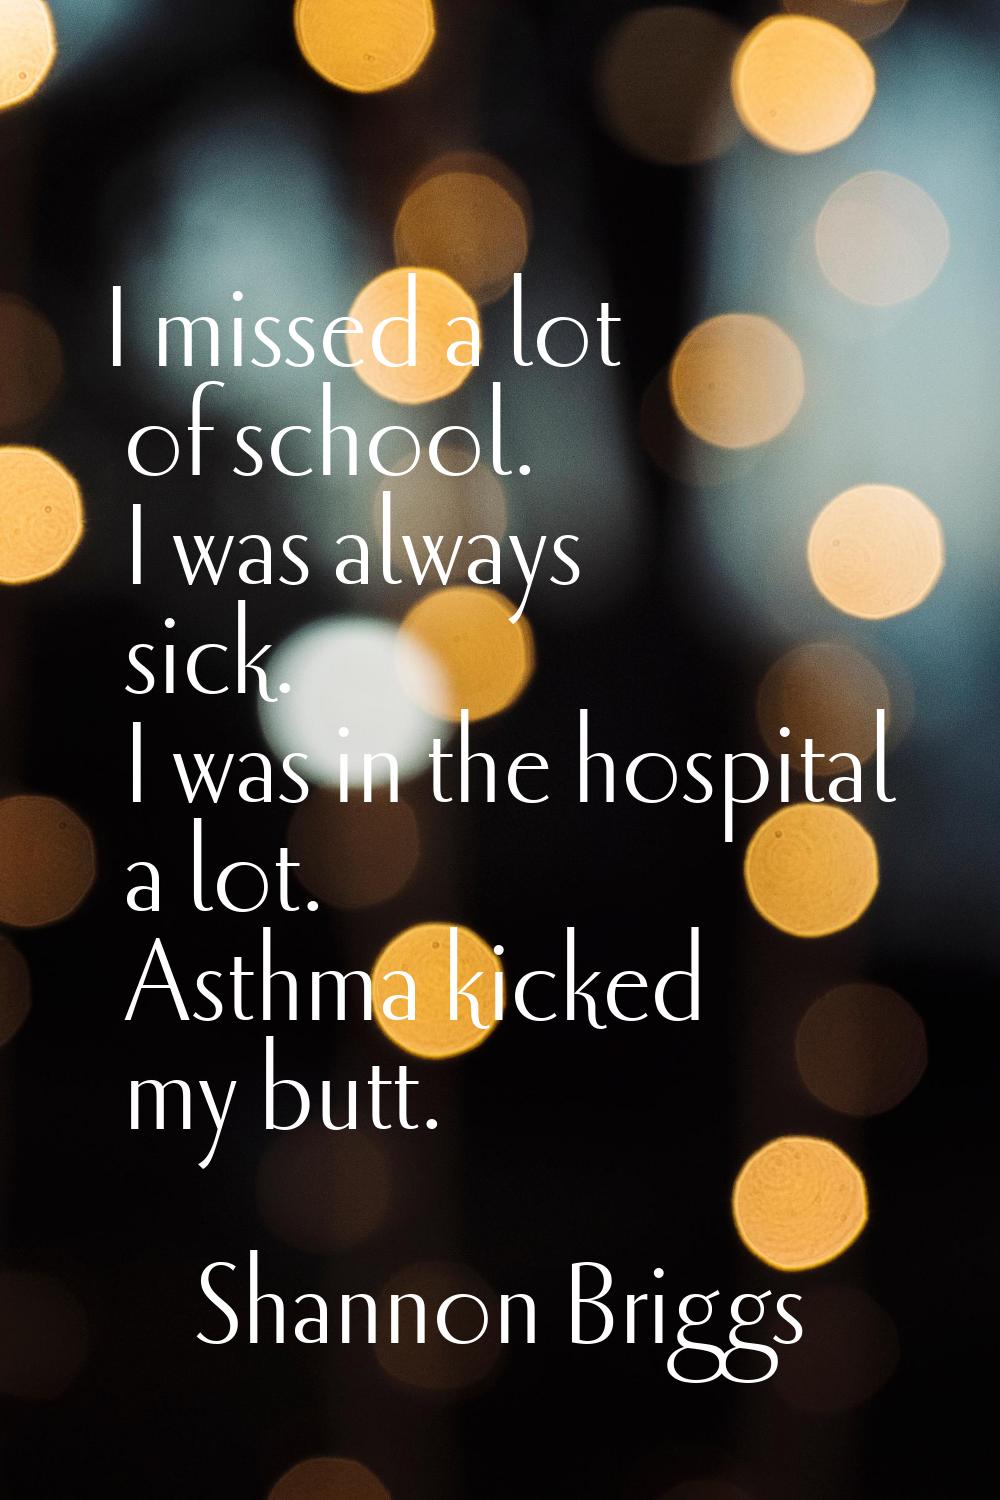 I missed a lot of school. I was always sick. I was in the hospital a lot. Asthma kicked my butt.